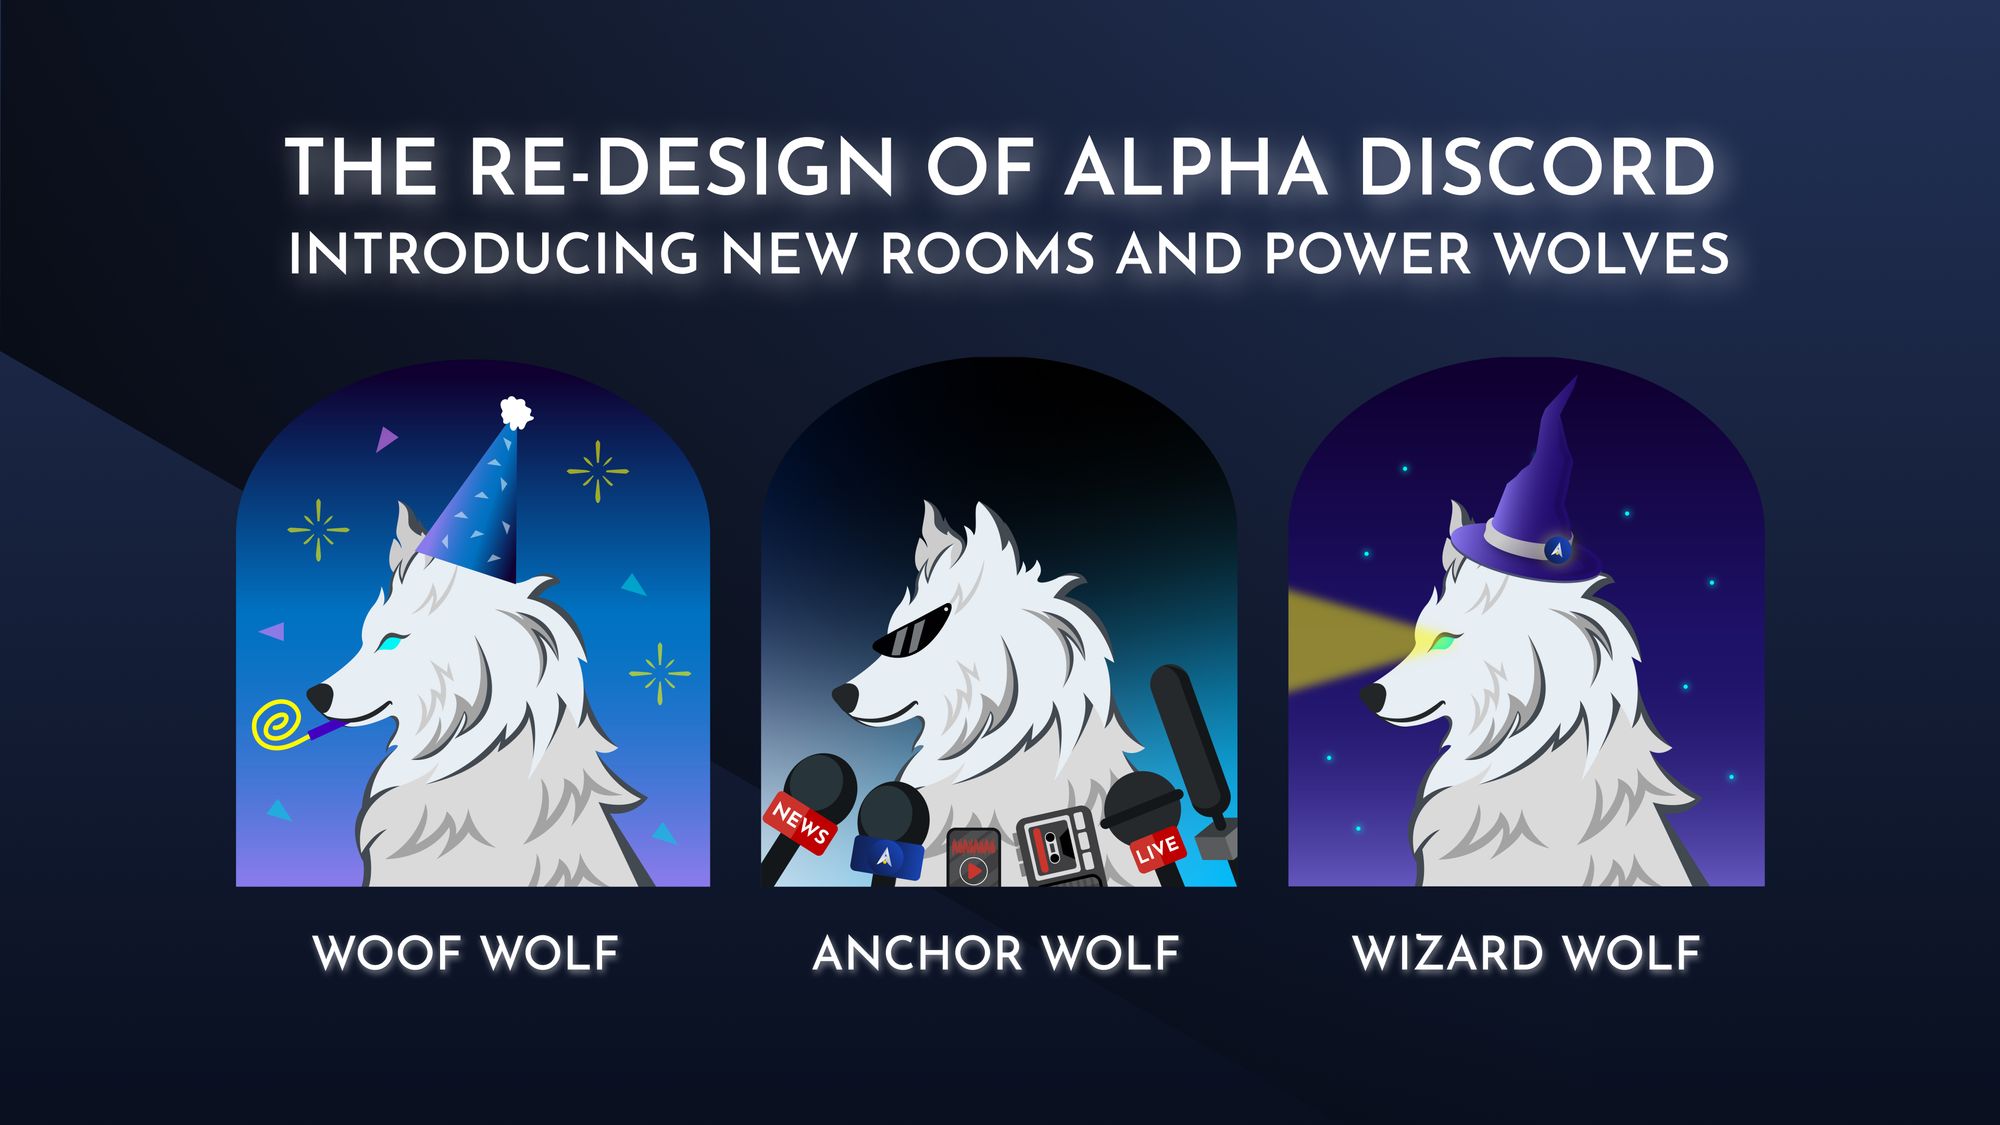 The Re-design of Alpha Discord: Introducing New Rooms and Power Wolves